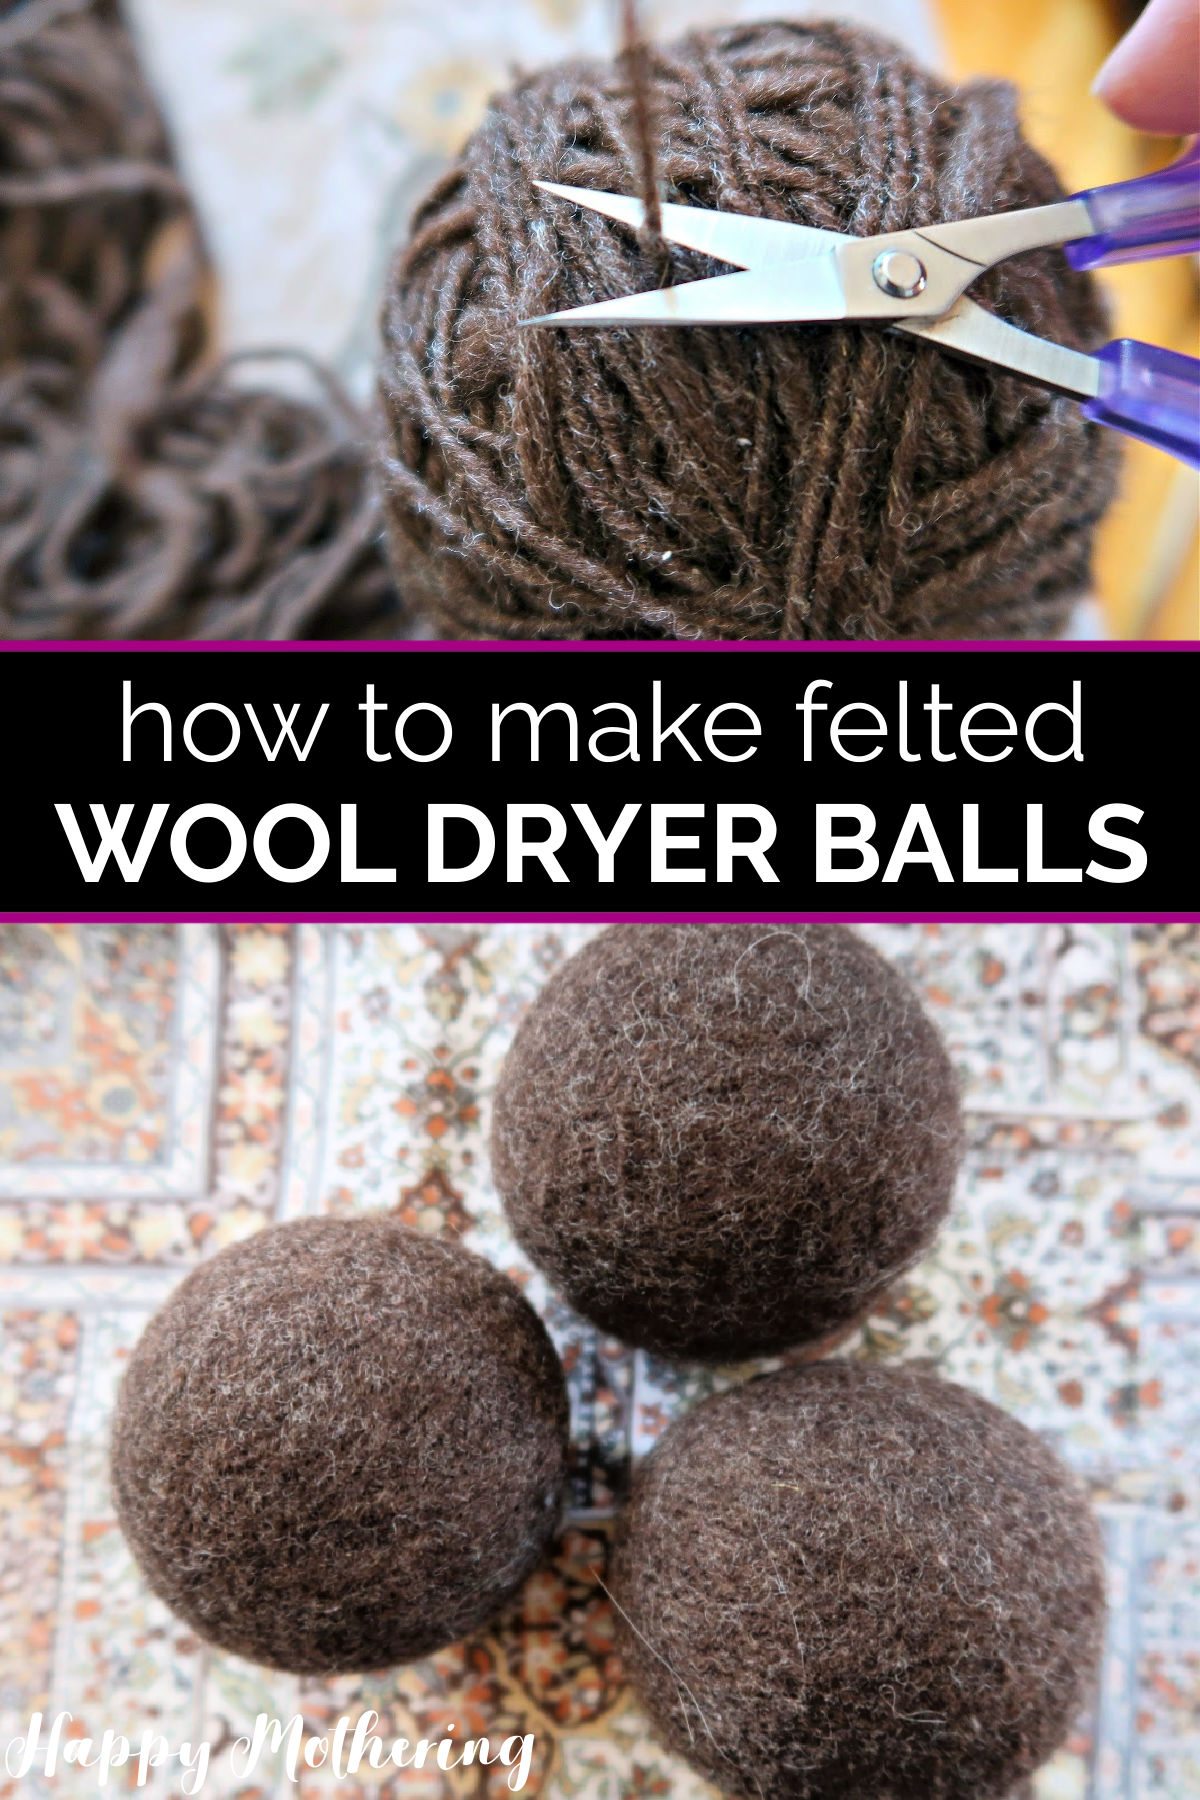 Yarn ball being trimmed off above three fully felted wool dryer balls